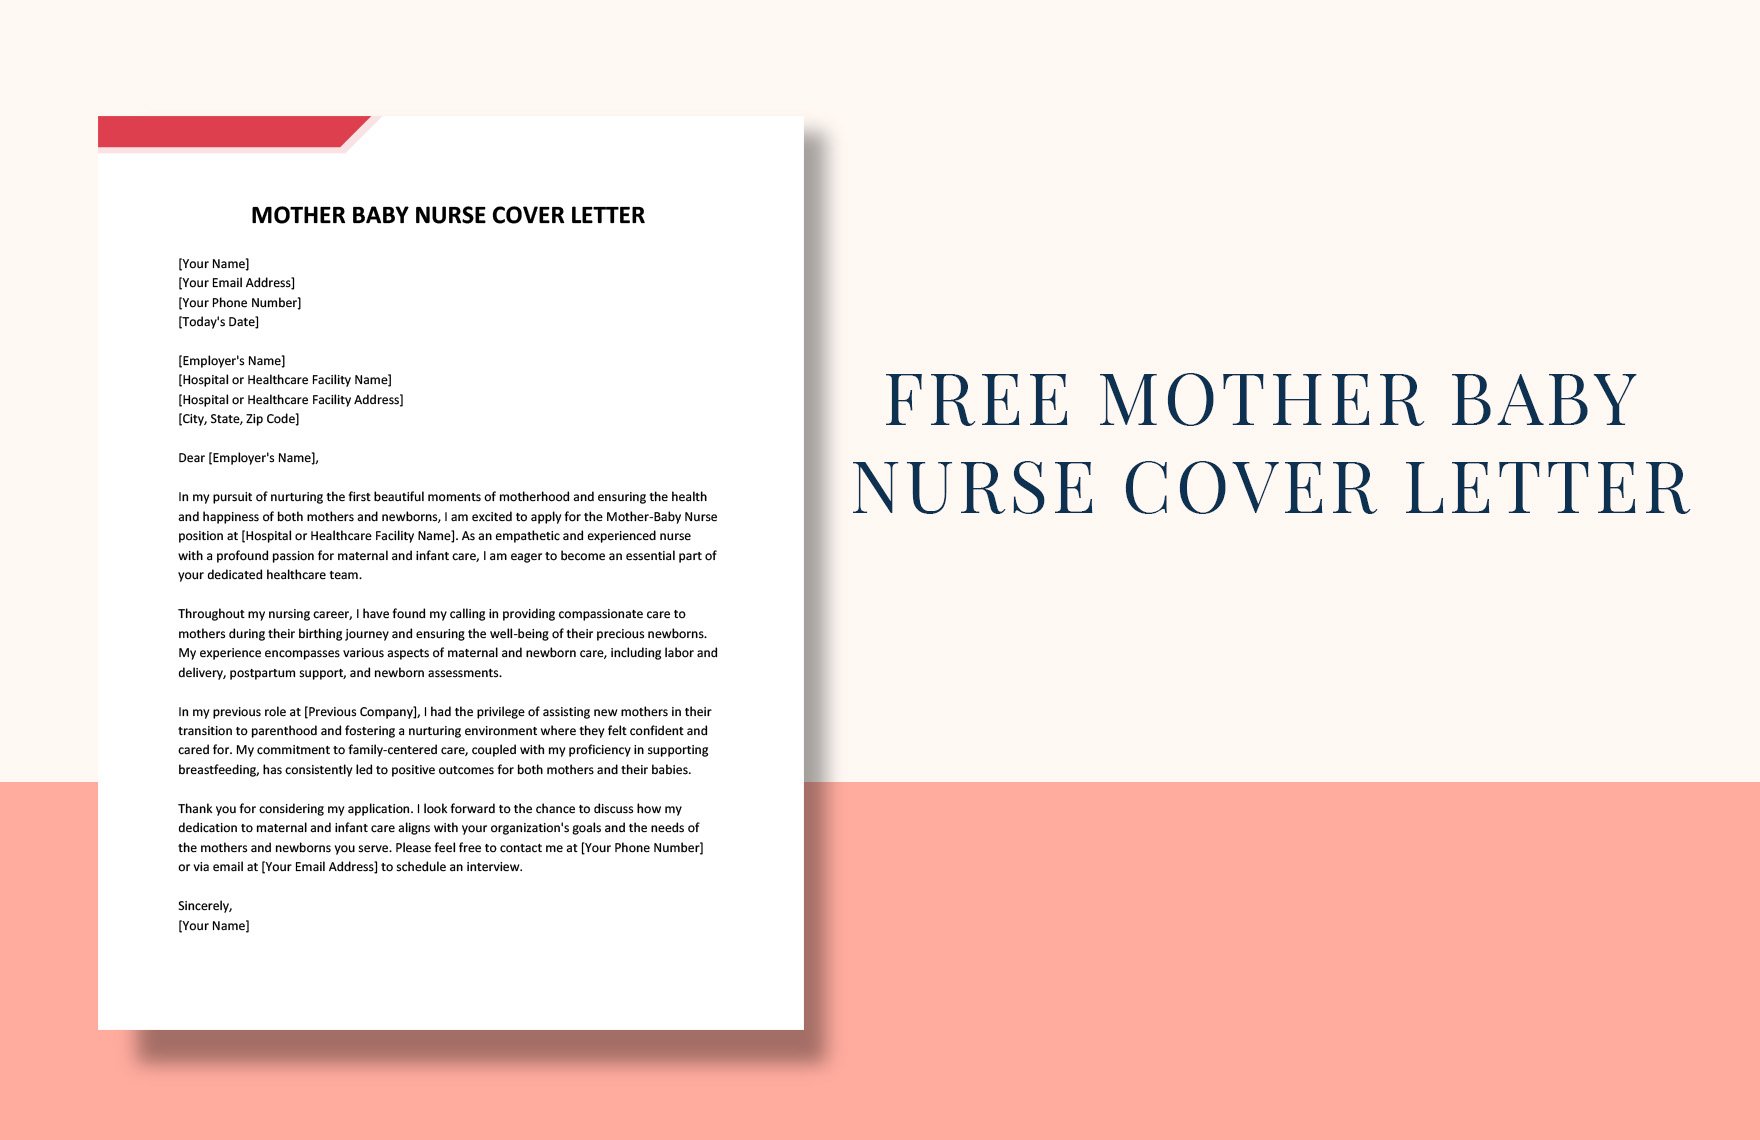 Mother Baby Nurse Cover Letter